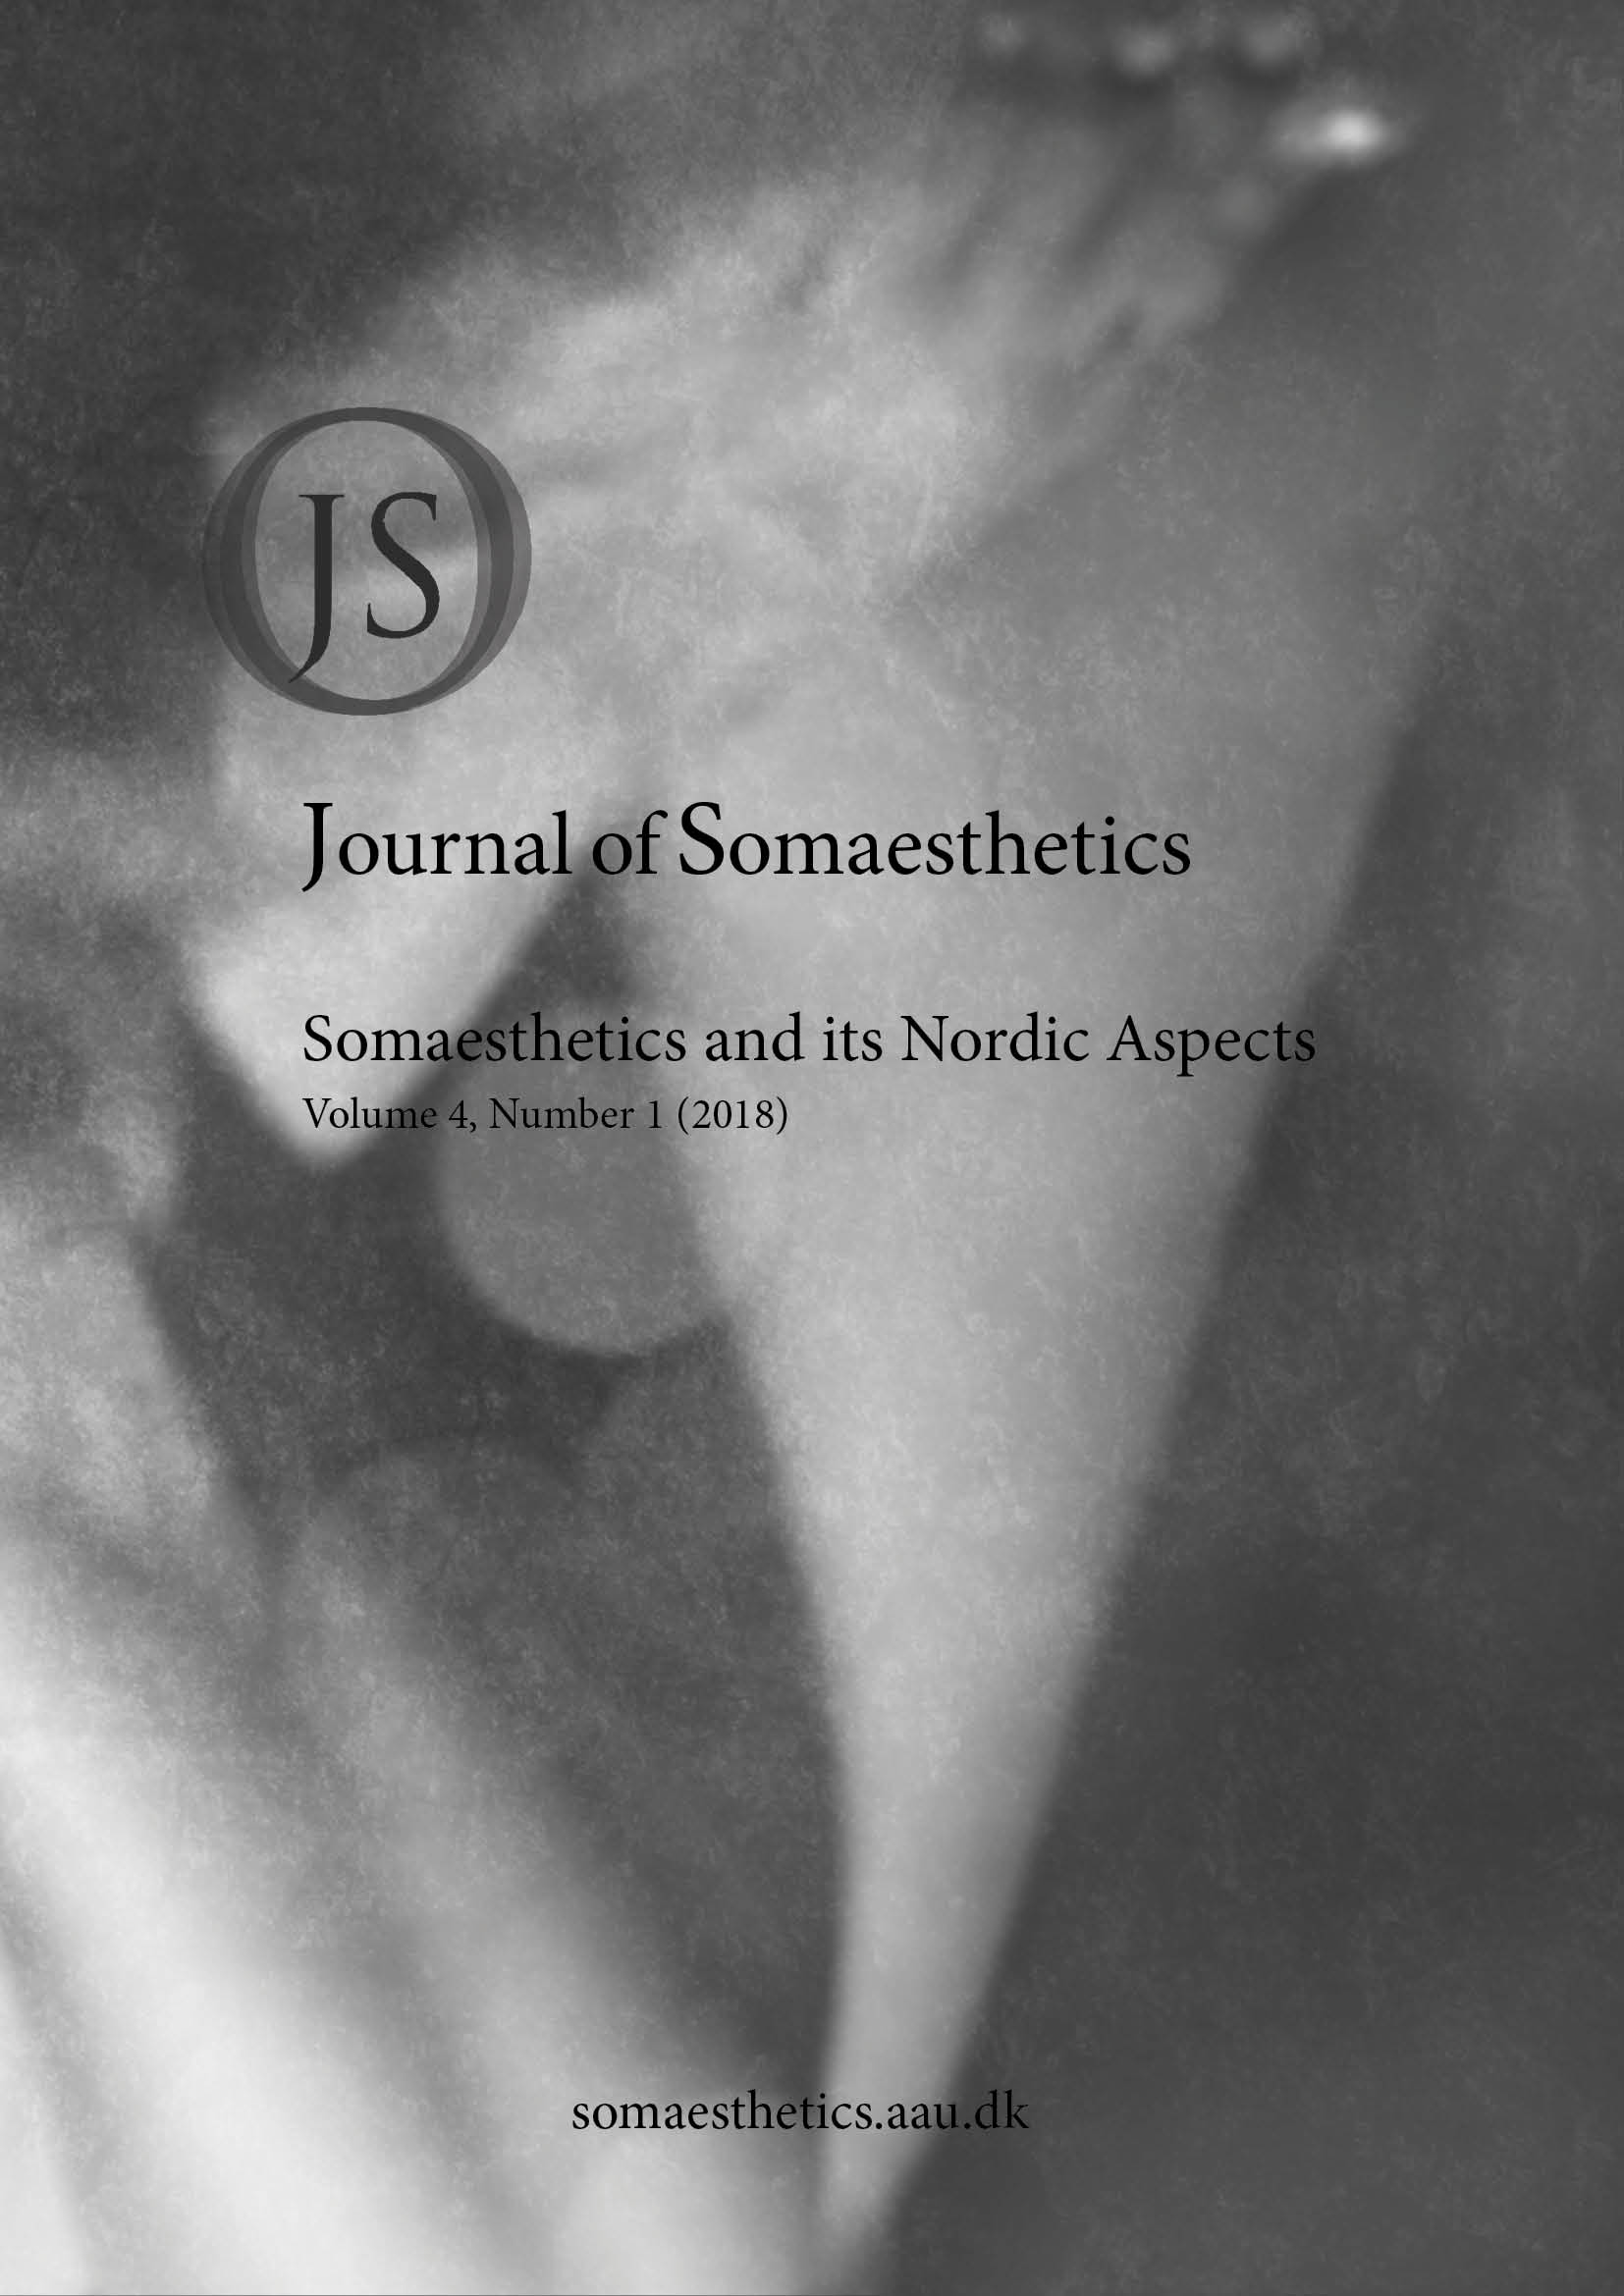 					View Vol. 4 No. 1 (2018): Somaesthetics and its Nordic Aspects
				